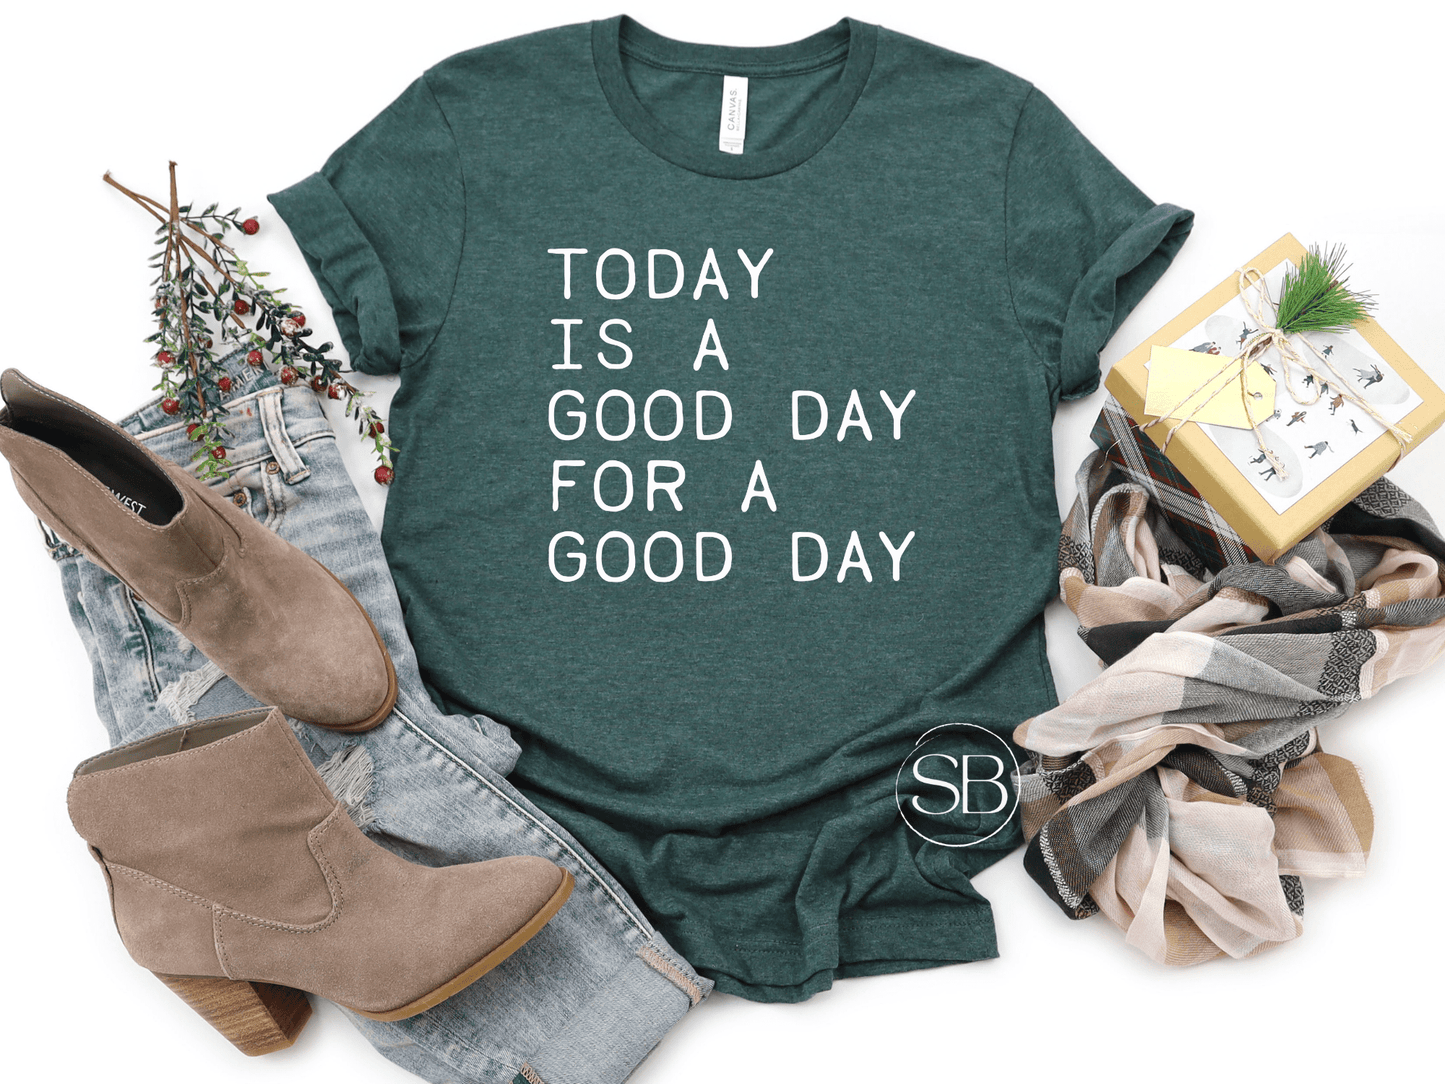 Today is a Good Day for a Good Day in White Inspirational Graphic Tee